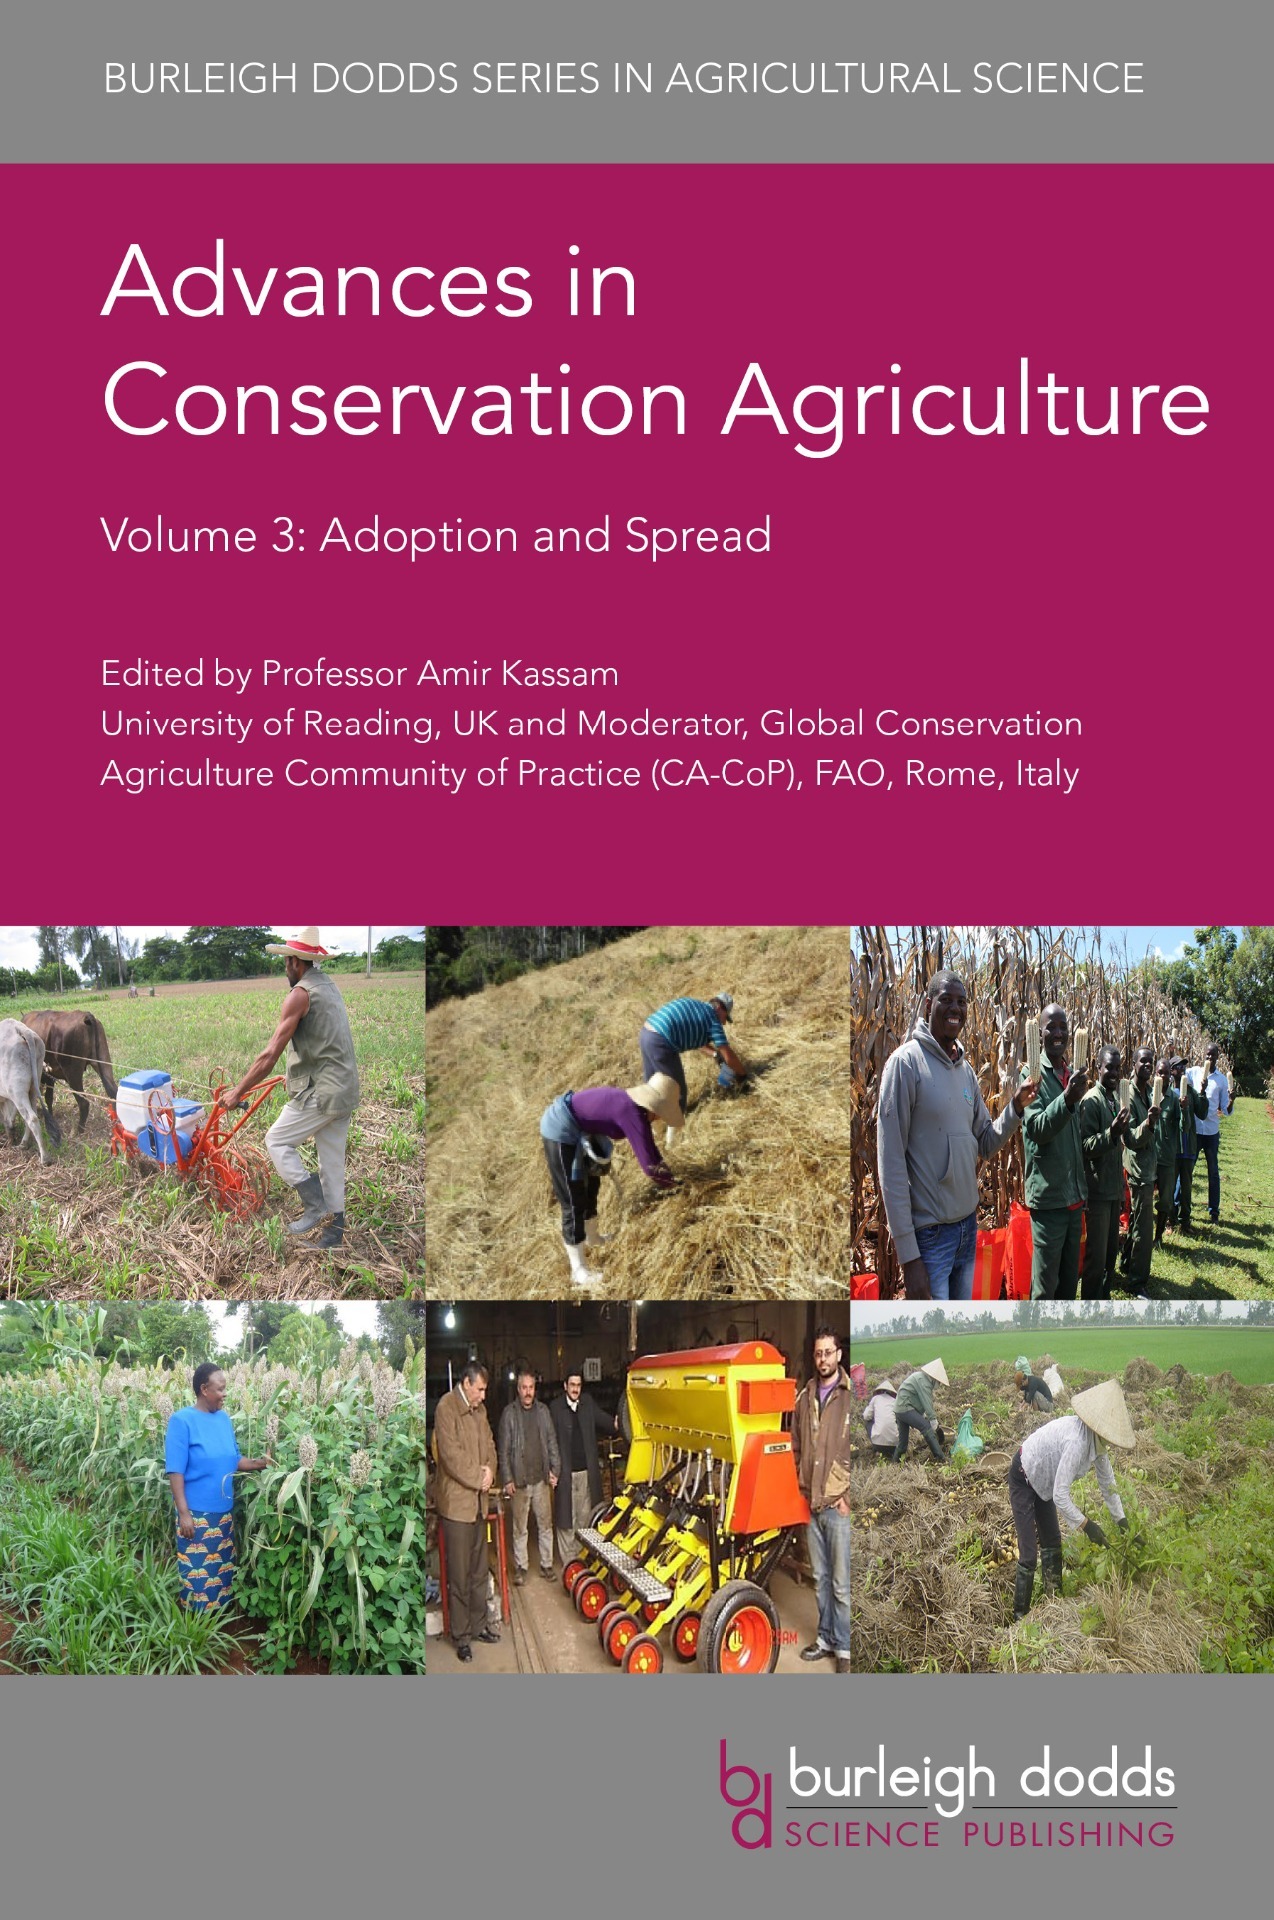 Advances in Conservation Agriculture - Volume 3